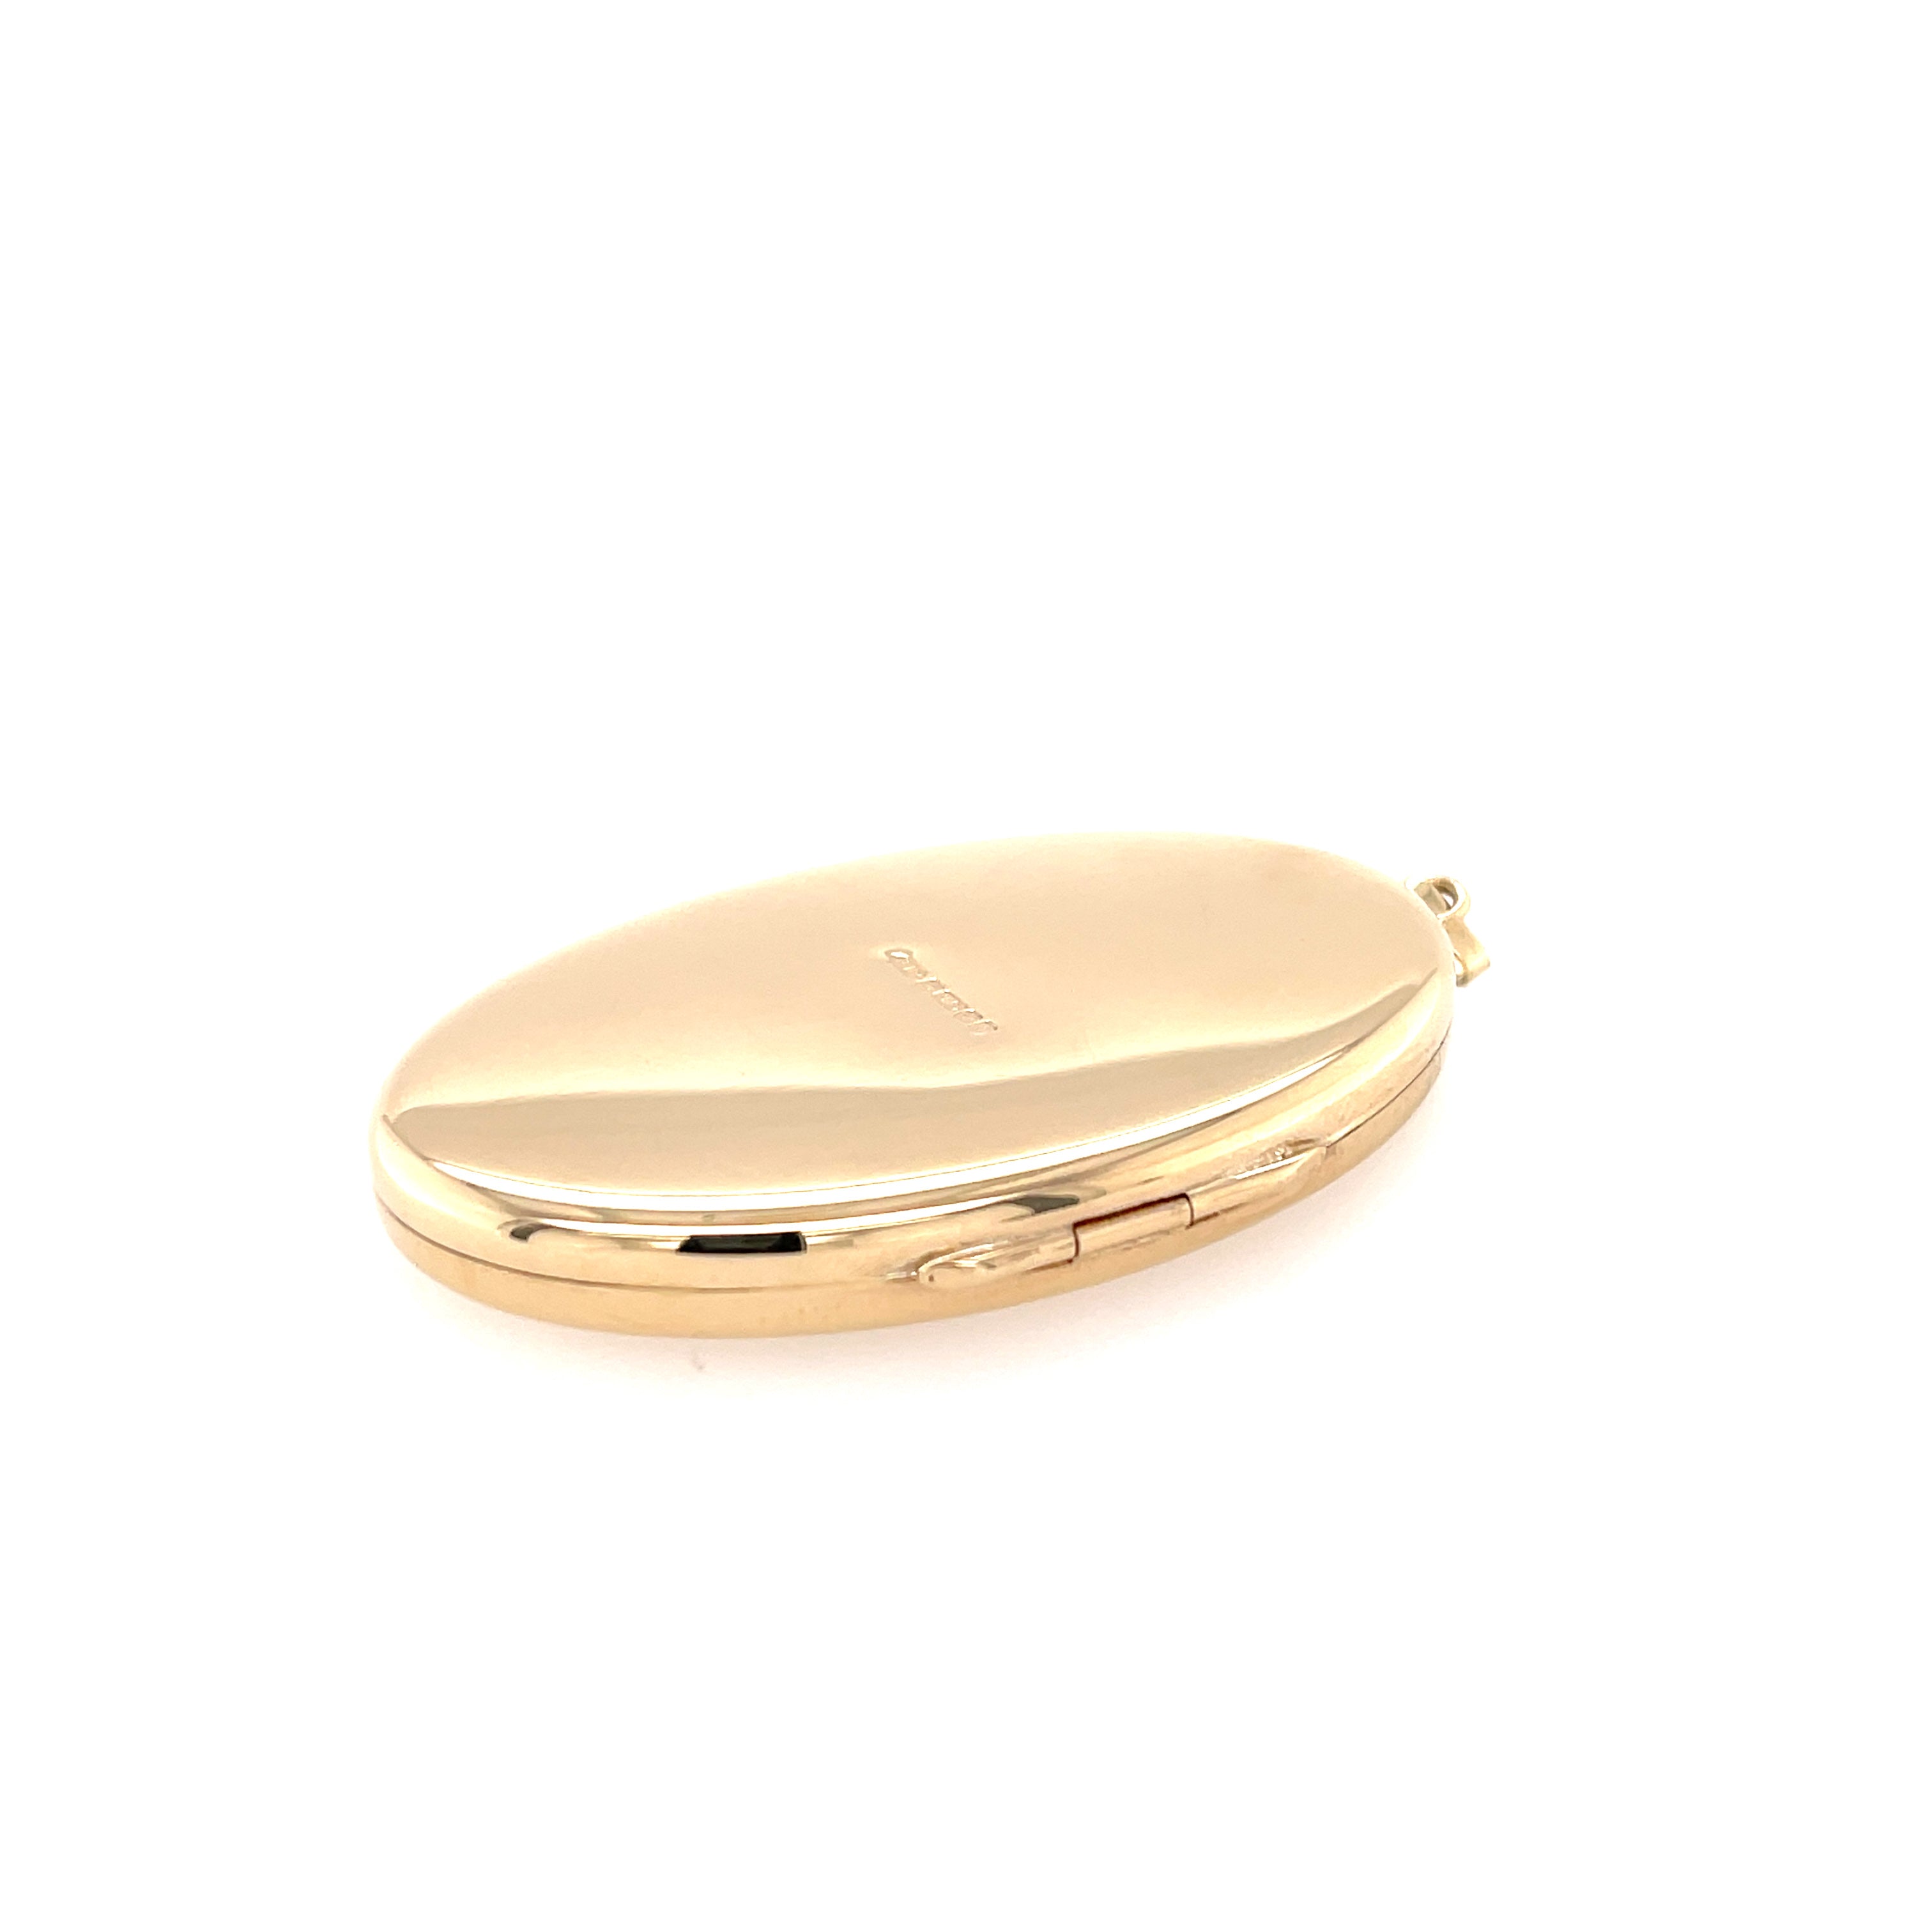 9ct Yellow Gold Oval Engraved Locket Pendant - 12.35g SOLD